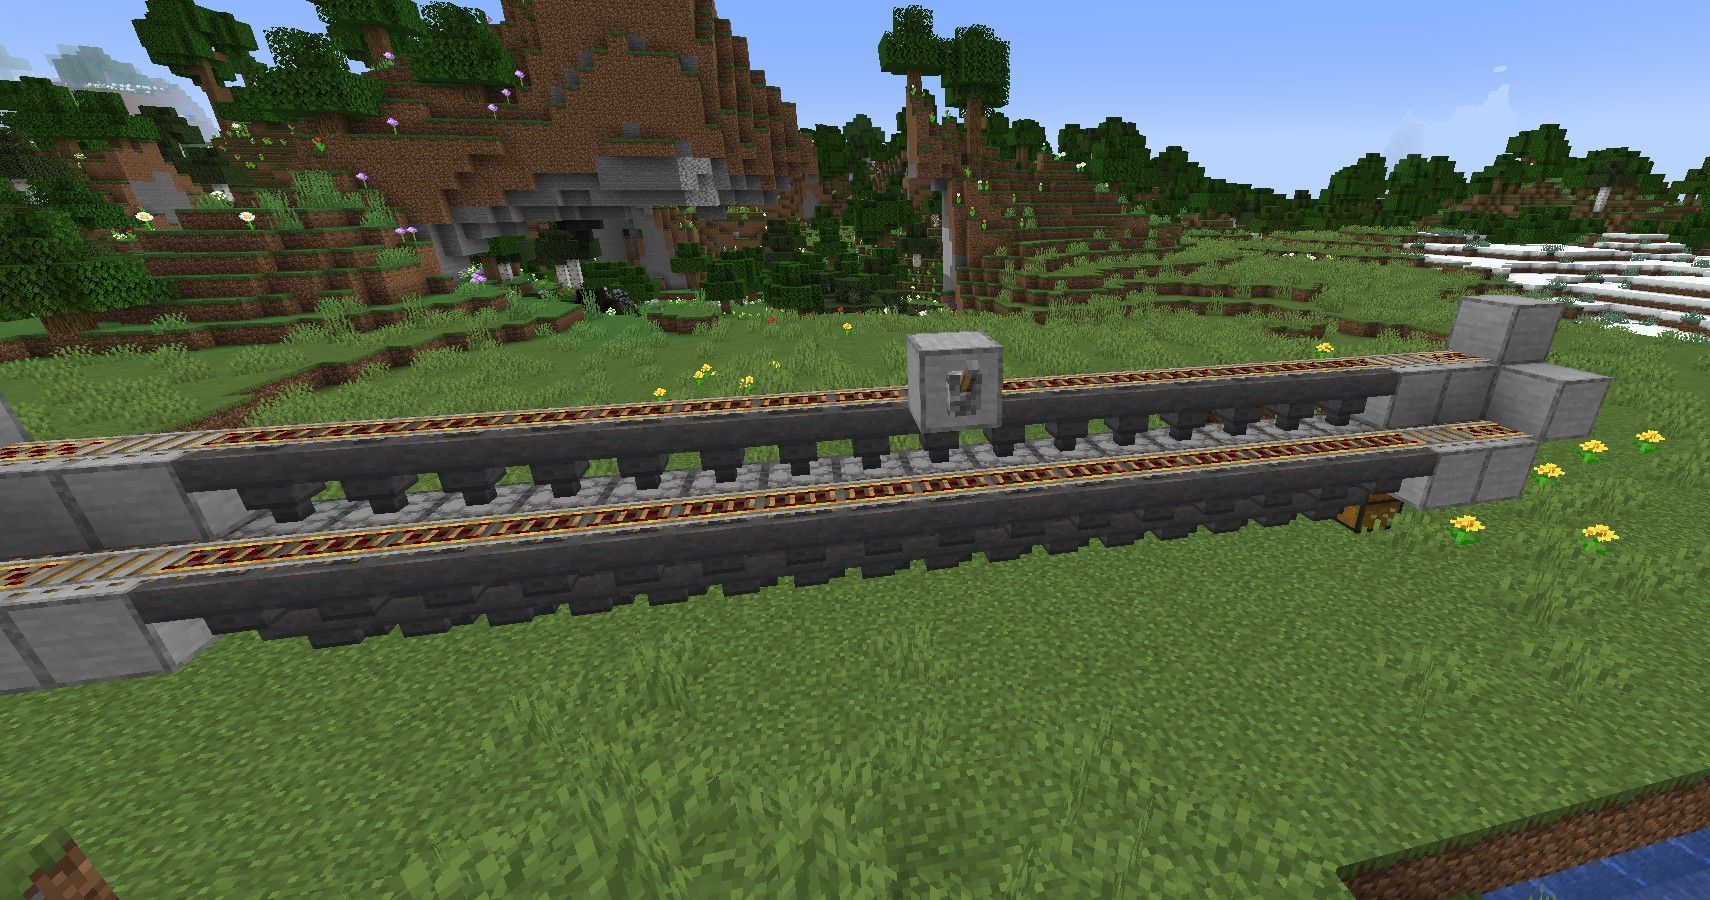 sixth step to making Minecraft super smelter